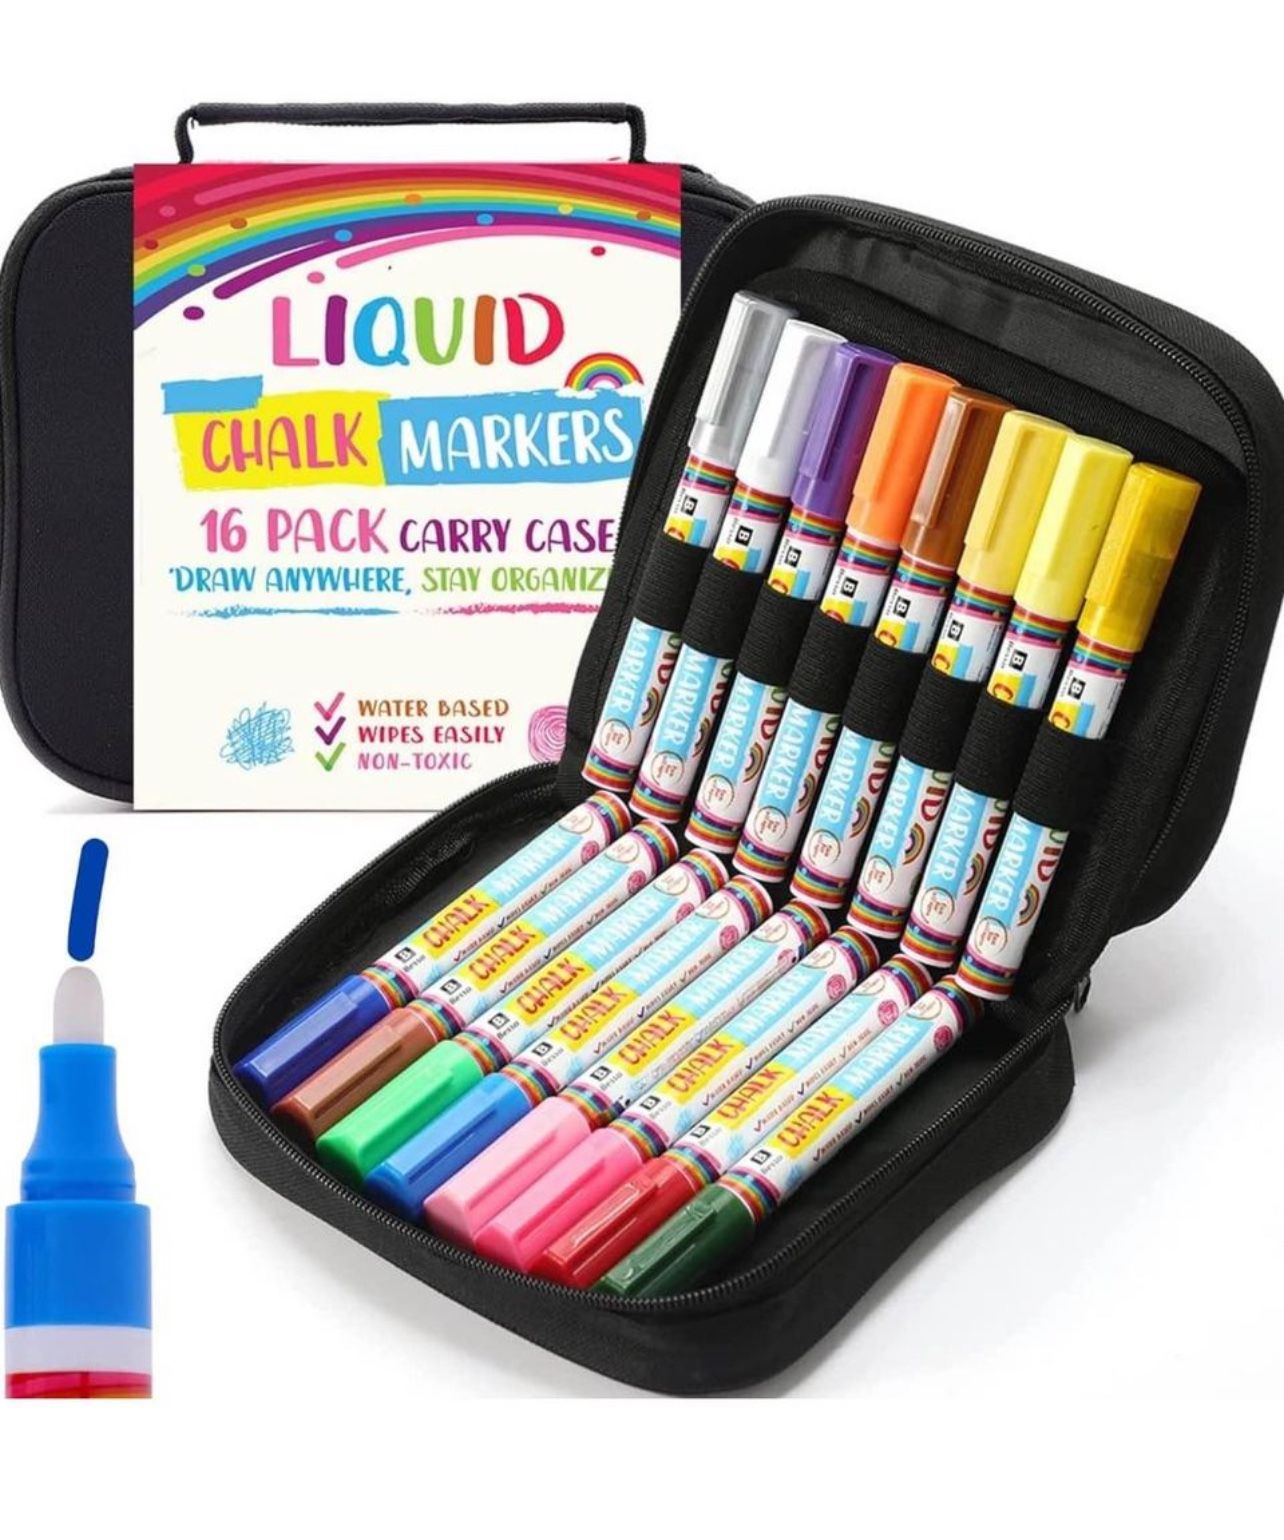 Brandnew 16 Chalk Markers with Case | Vibrant Liquid Chalkmarkers | Reversible Tips, Easy to Clean & Erase | Eraseable Chalkboard Pens for Chalkboard